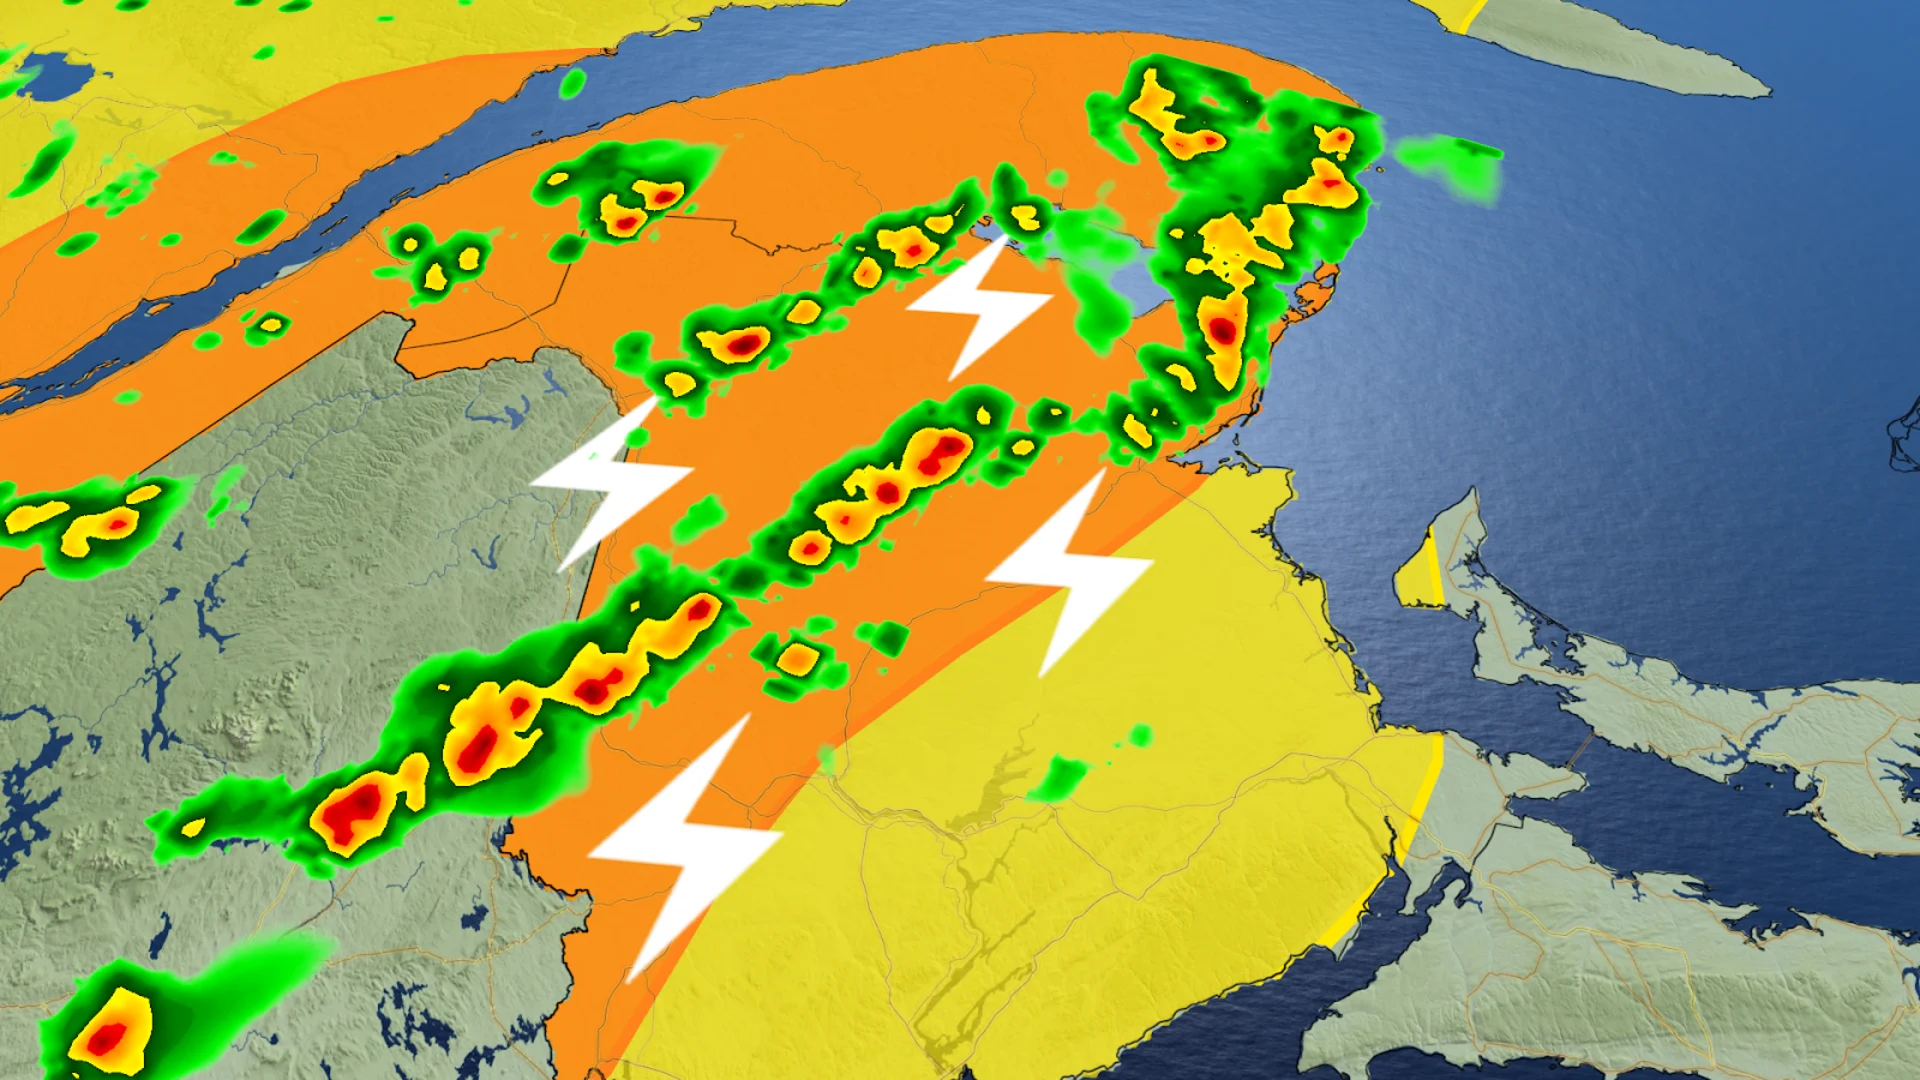 Stay alert Friday as severe storms target parts of the Maritimes. One or two tornadoes are possible. Details, here